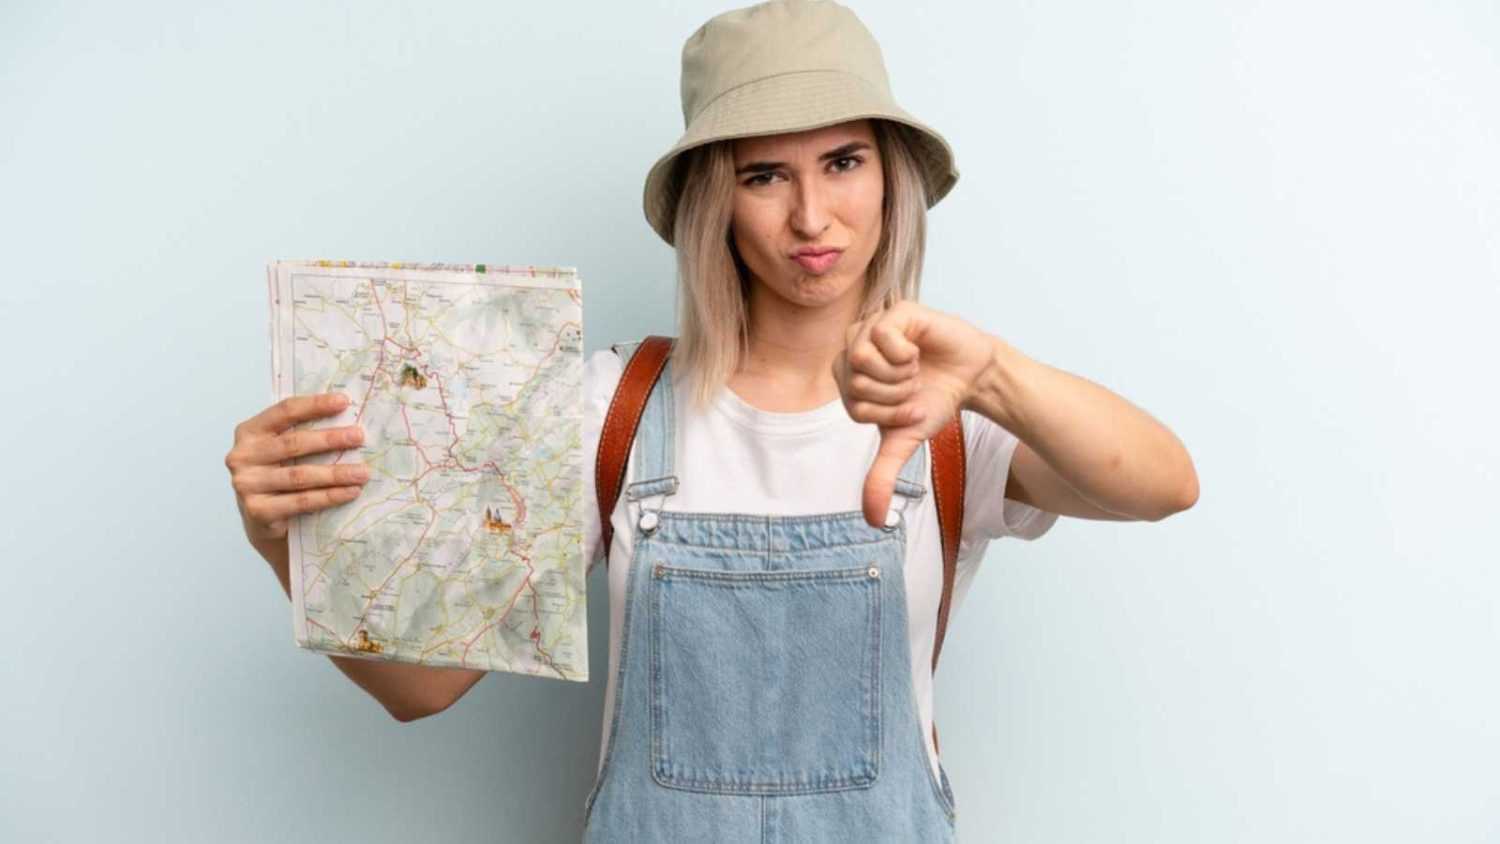 Woman with road map showing thumbs down